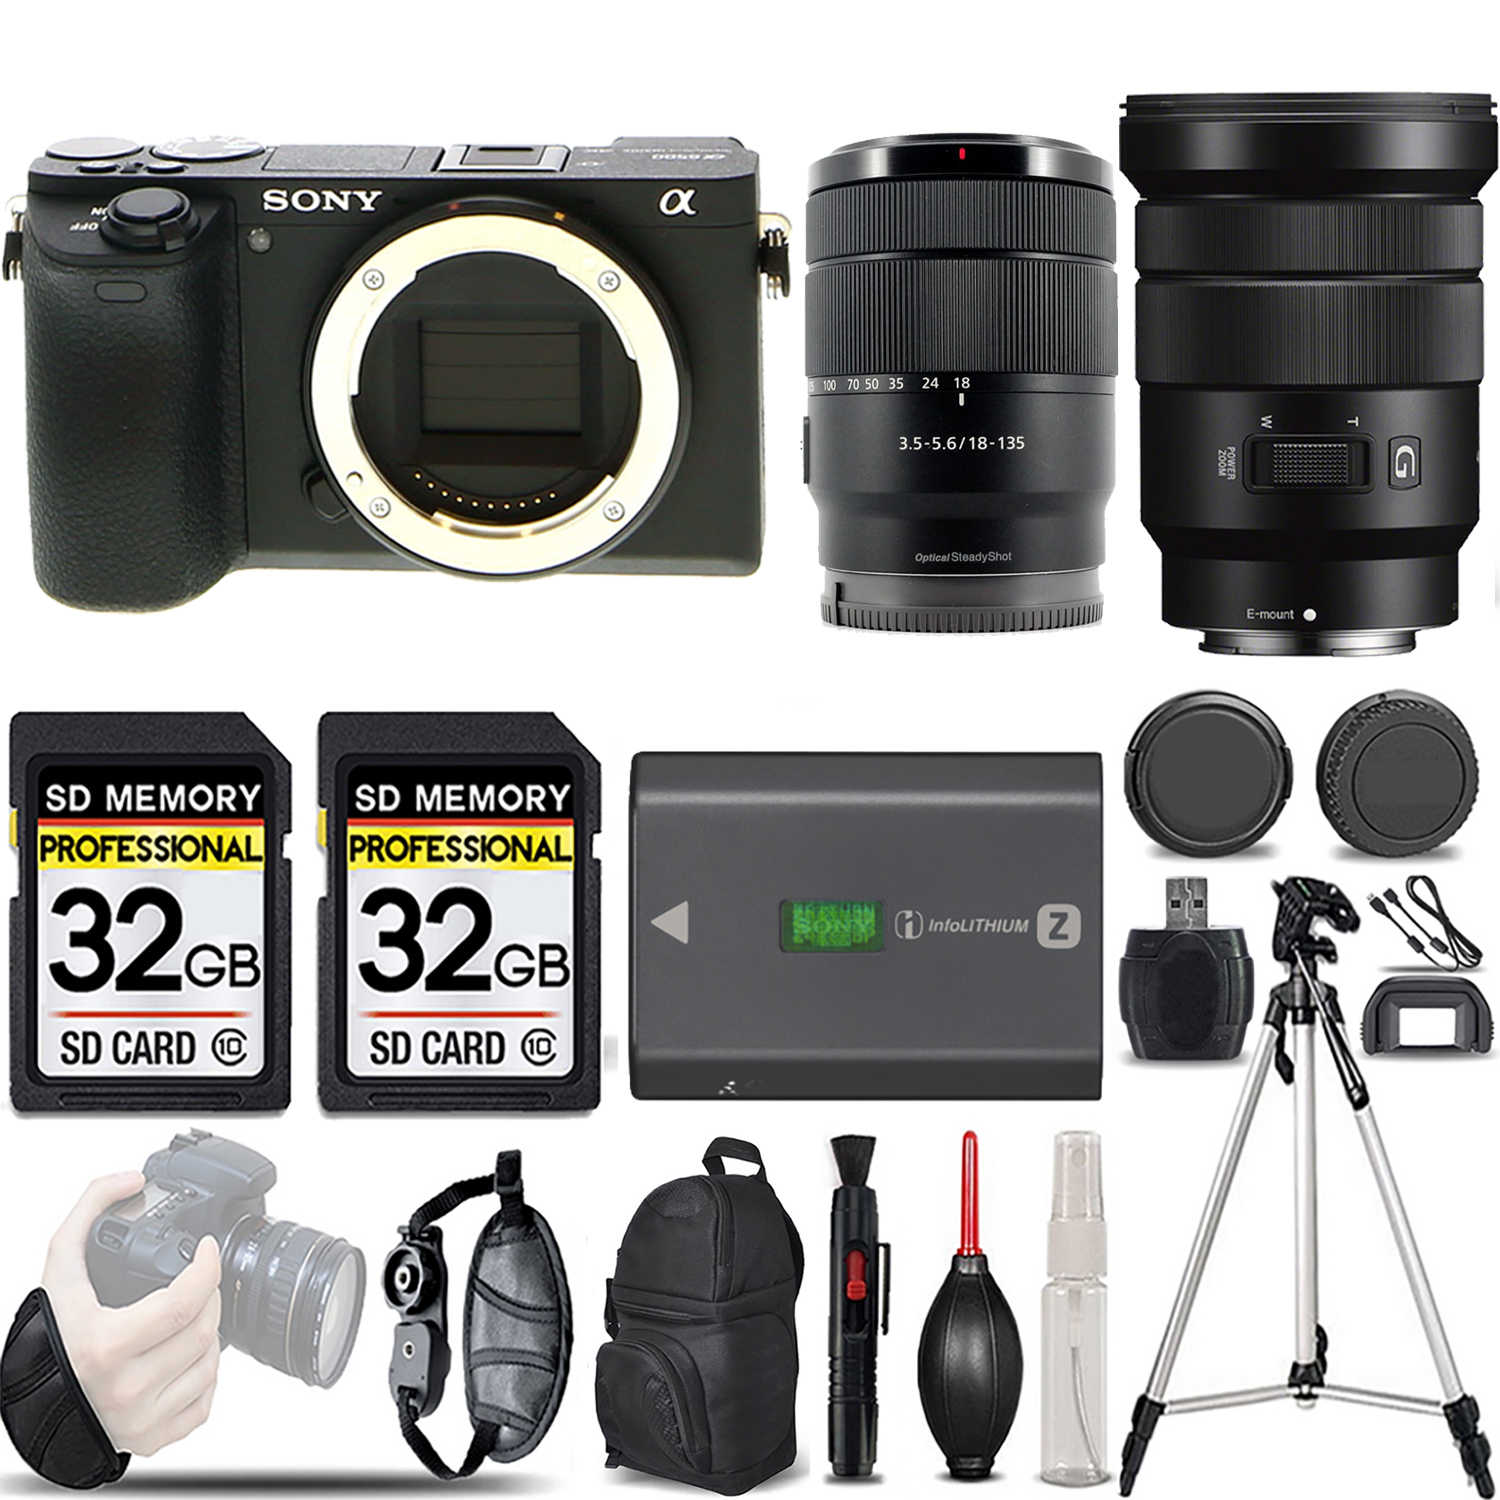 a6600 Camera + 18-135mm Lens + 18-105mm f/4 G OSS Lens - LOADED KIT (ILCE6600/B) *FREE SHIPPING*